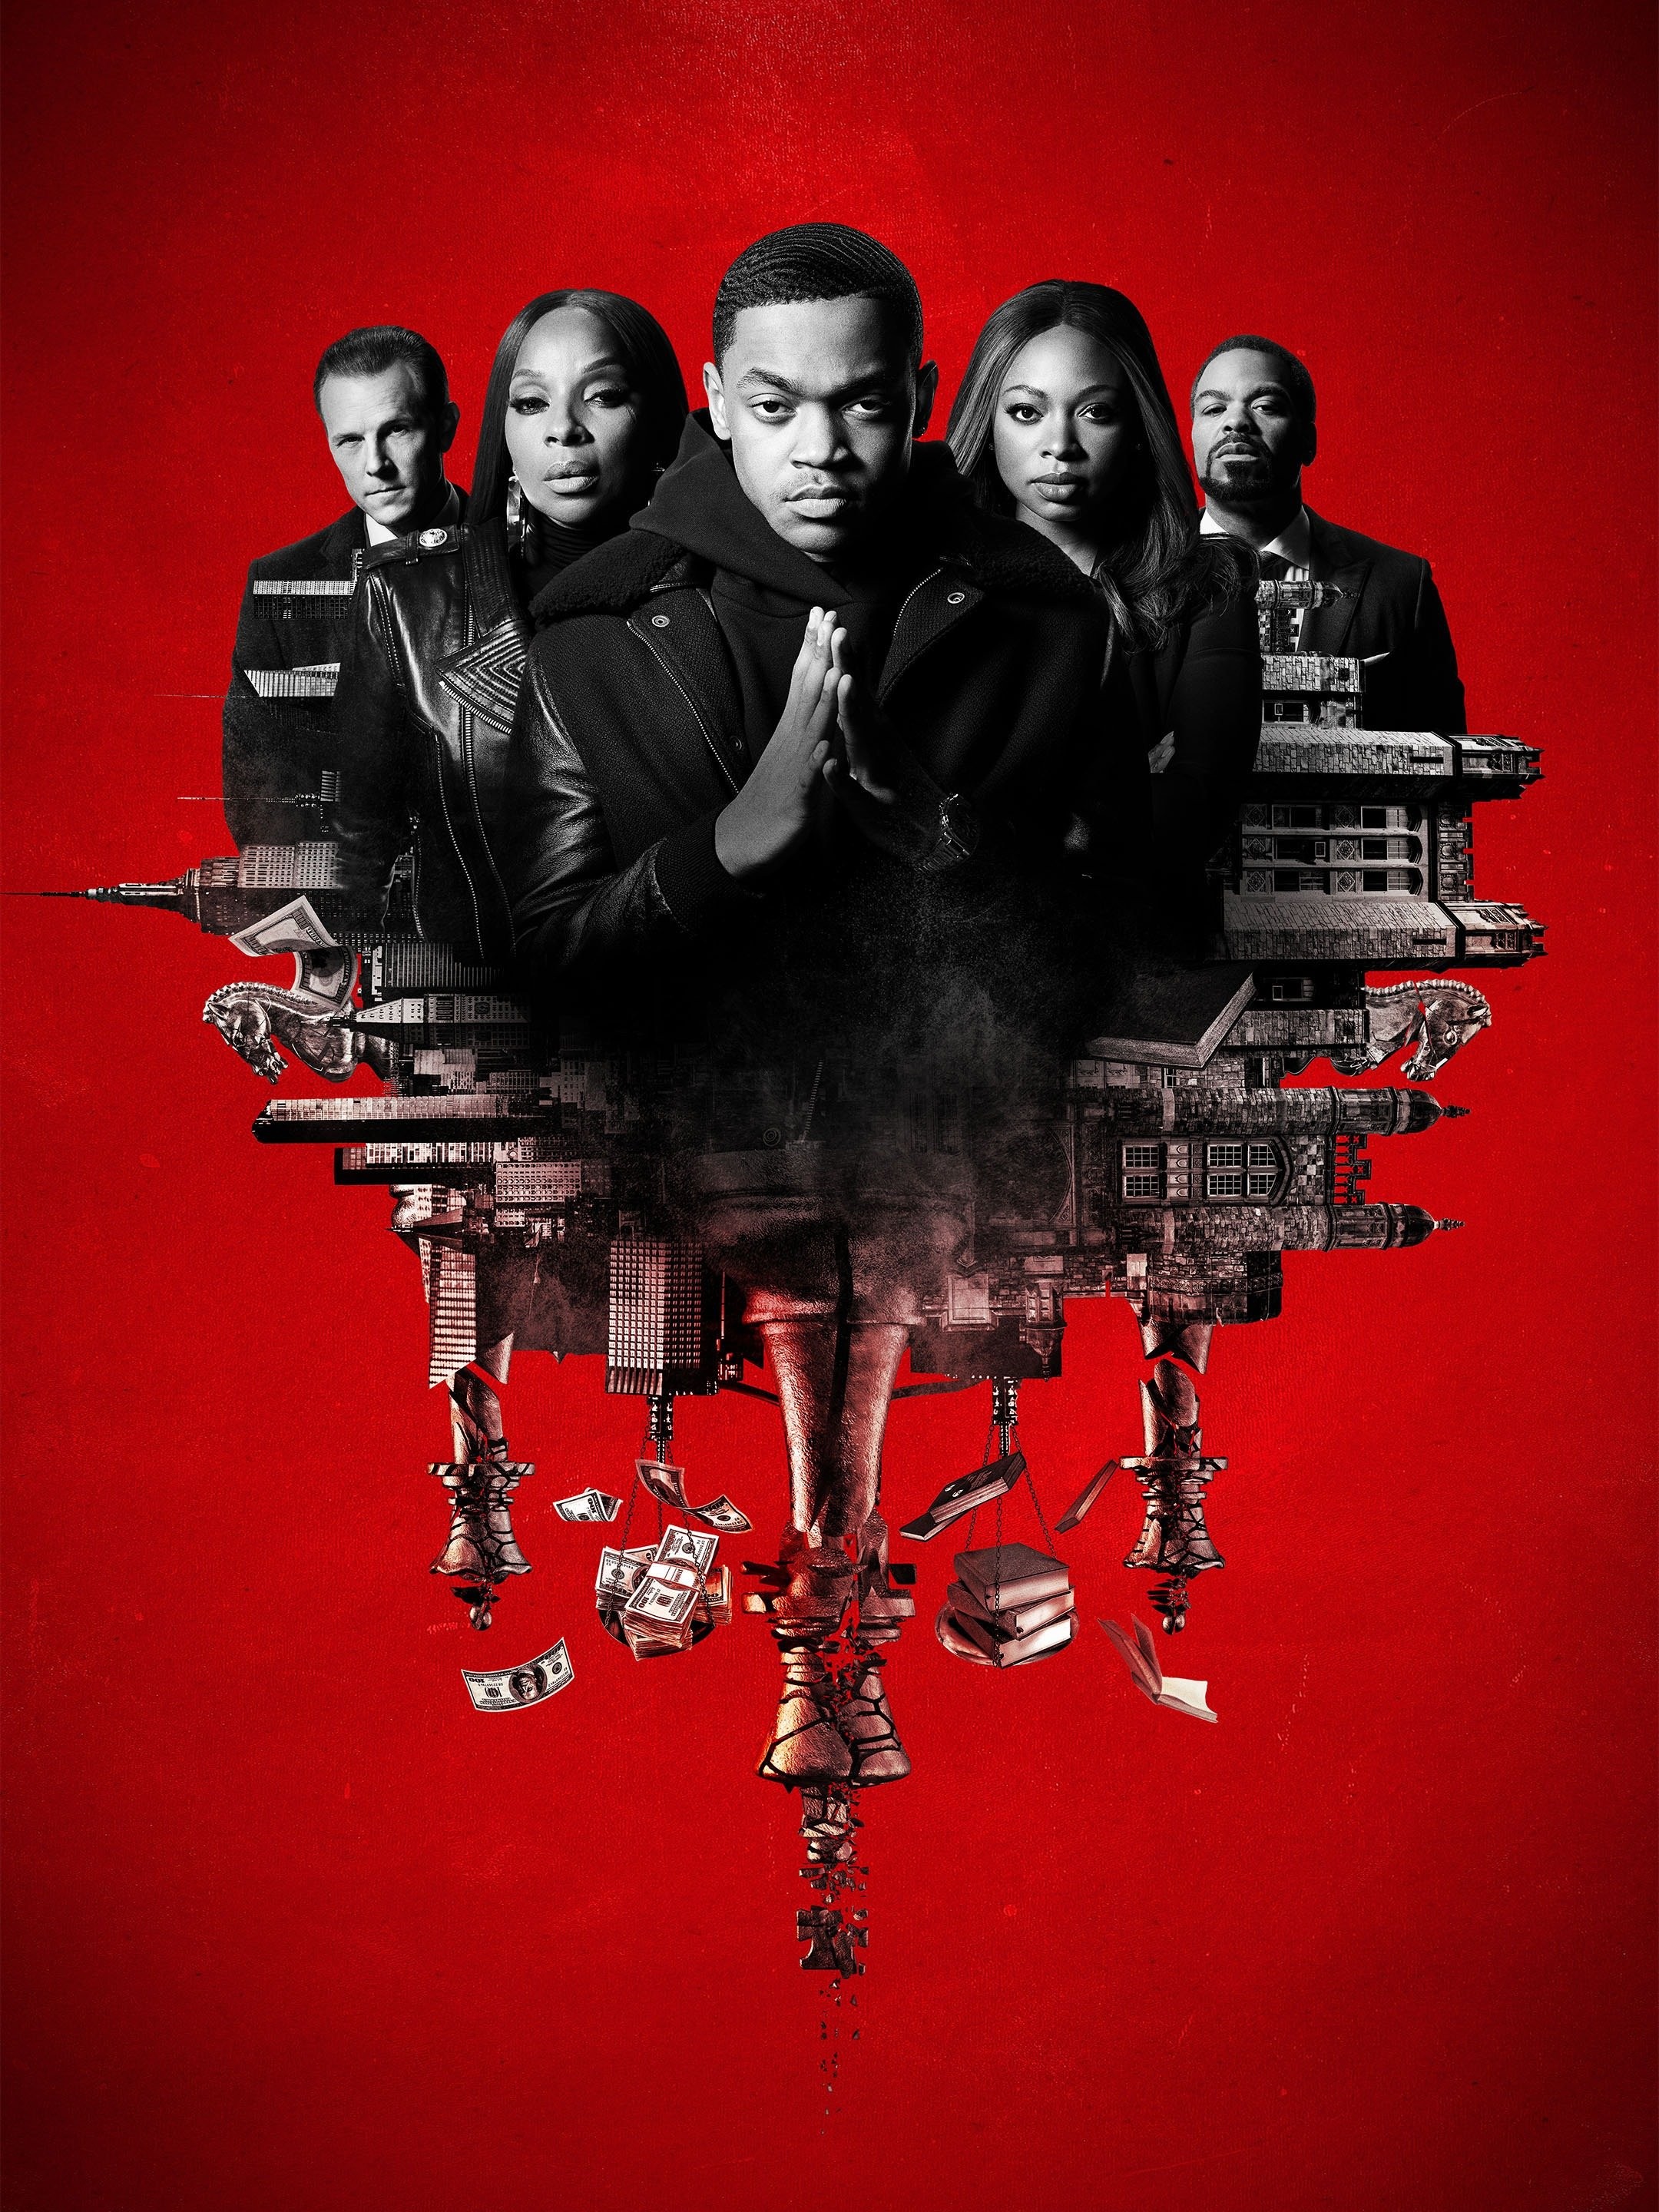 Power Book II: Ghost Season 1 Episode 3 Review: Play the Game - TV Fanatic